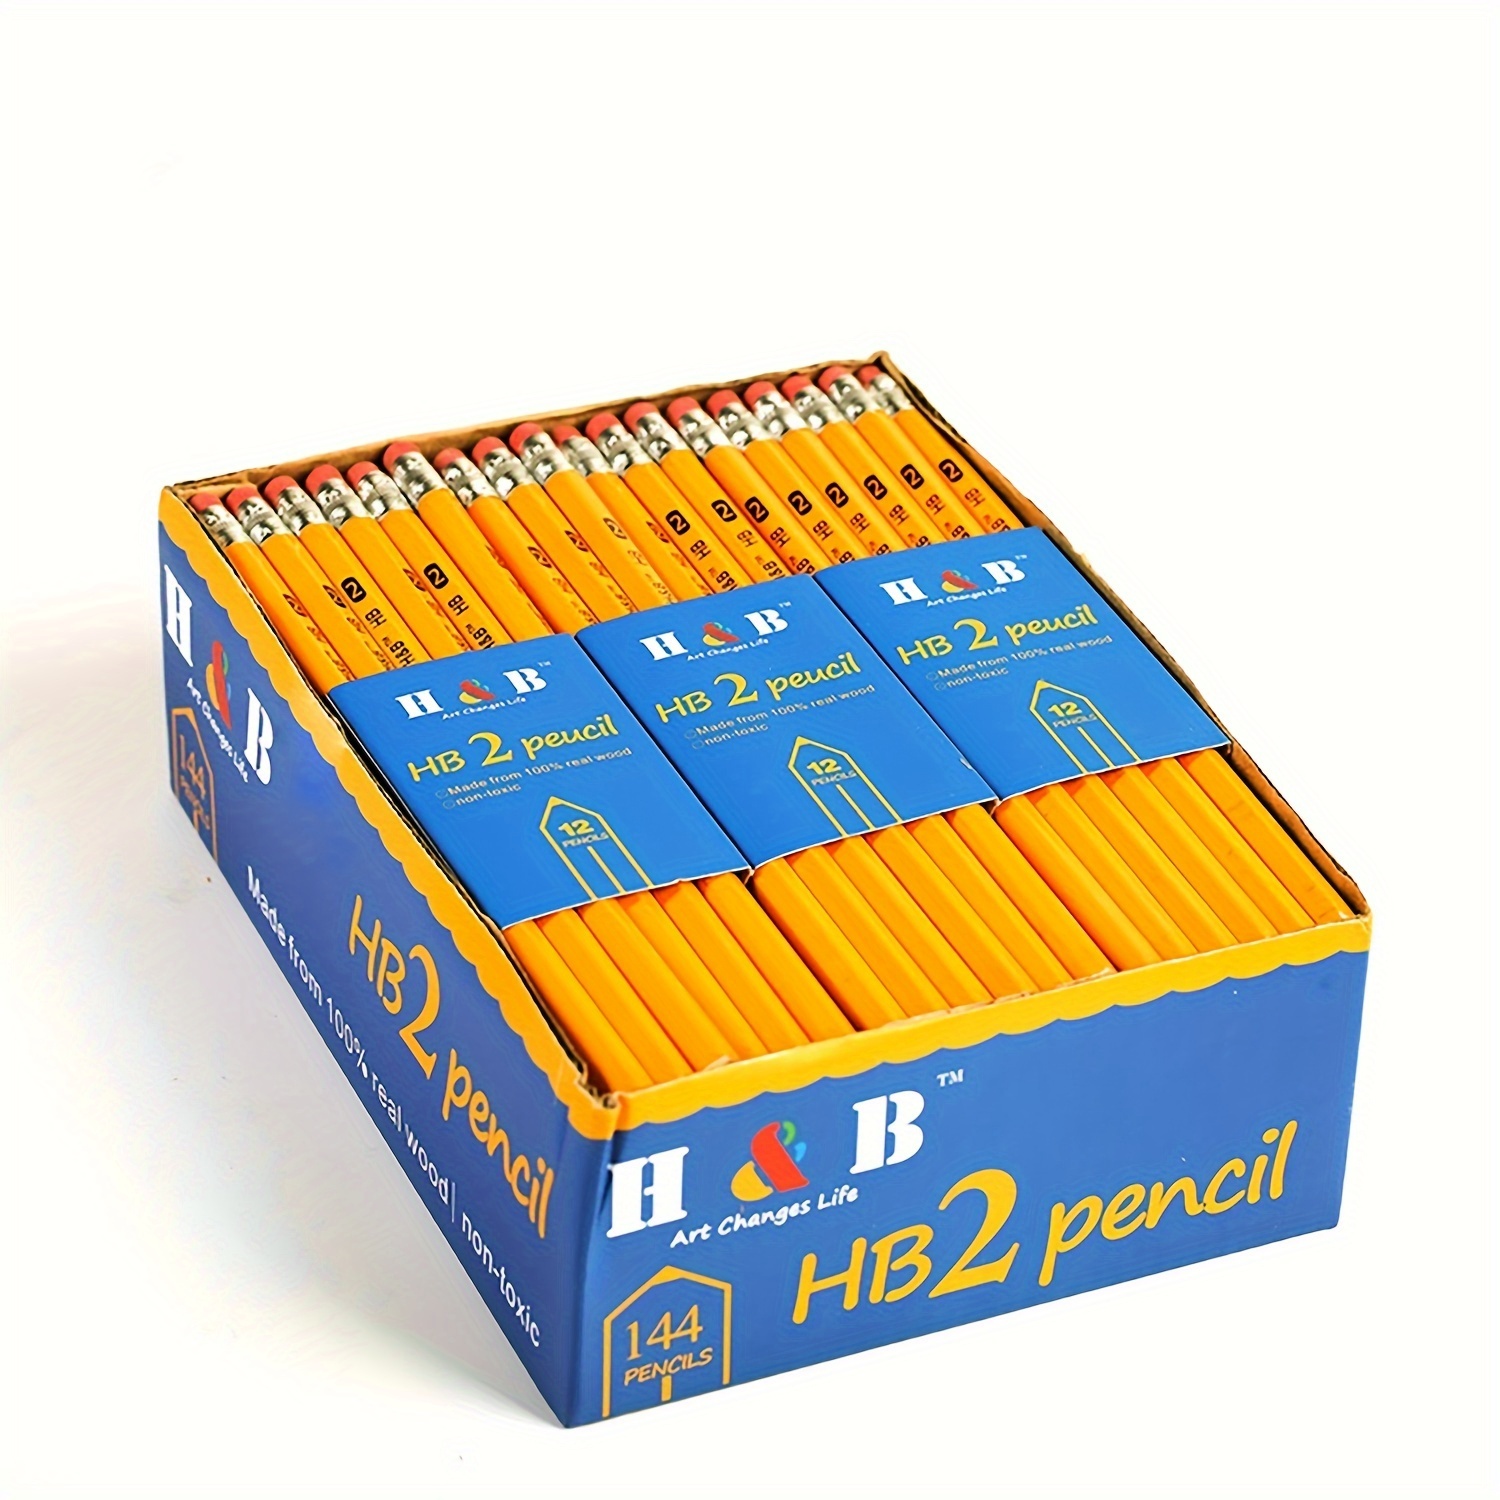 

Hb Hexagon Wooden Pencils With Red Color Eraser, 12pcs/24pcs Pencils With Eraser Head, Hb Pencils For Writing, Drawing And Sketching, Yellow Wooden Pencils For Office